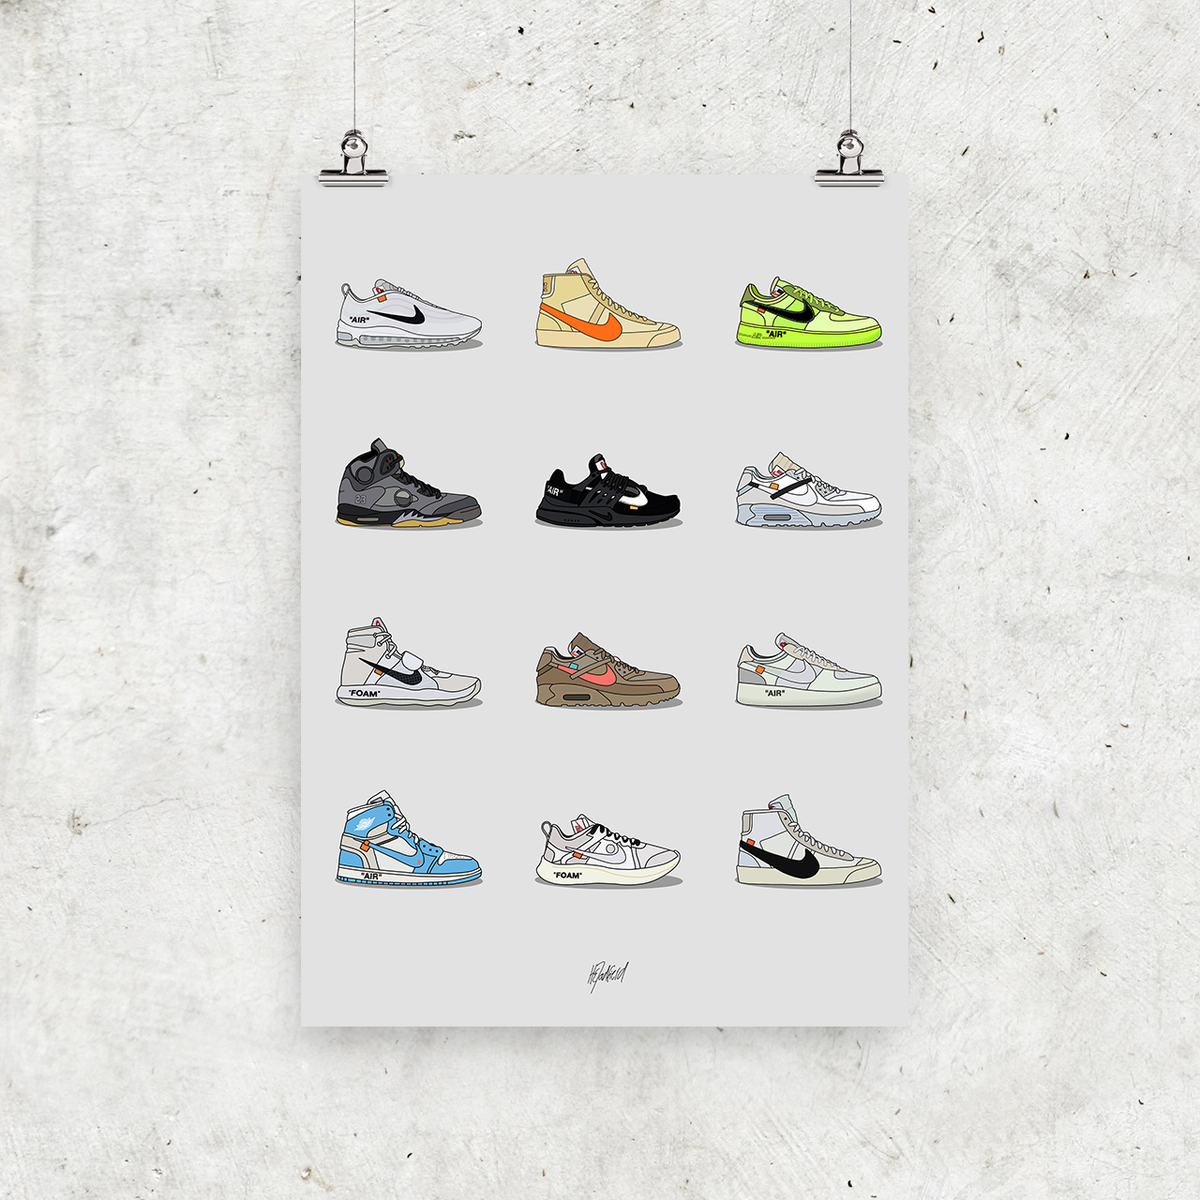 Off-White Nike Sneaker Collection Wall Art Illustration Print Poster – Above the US